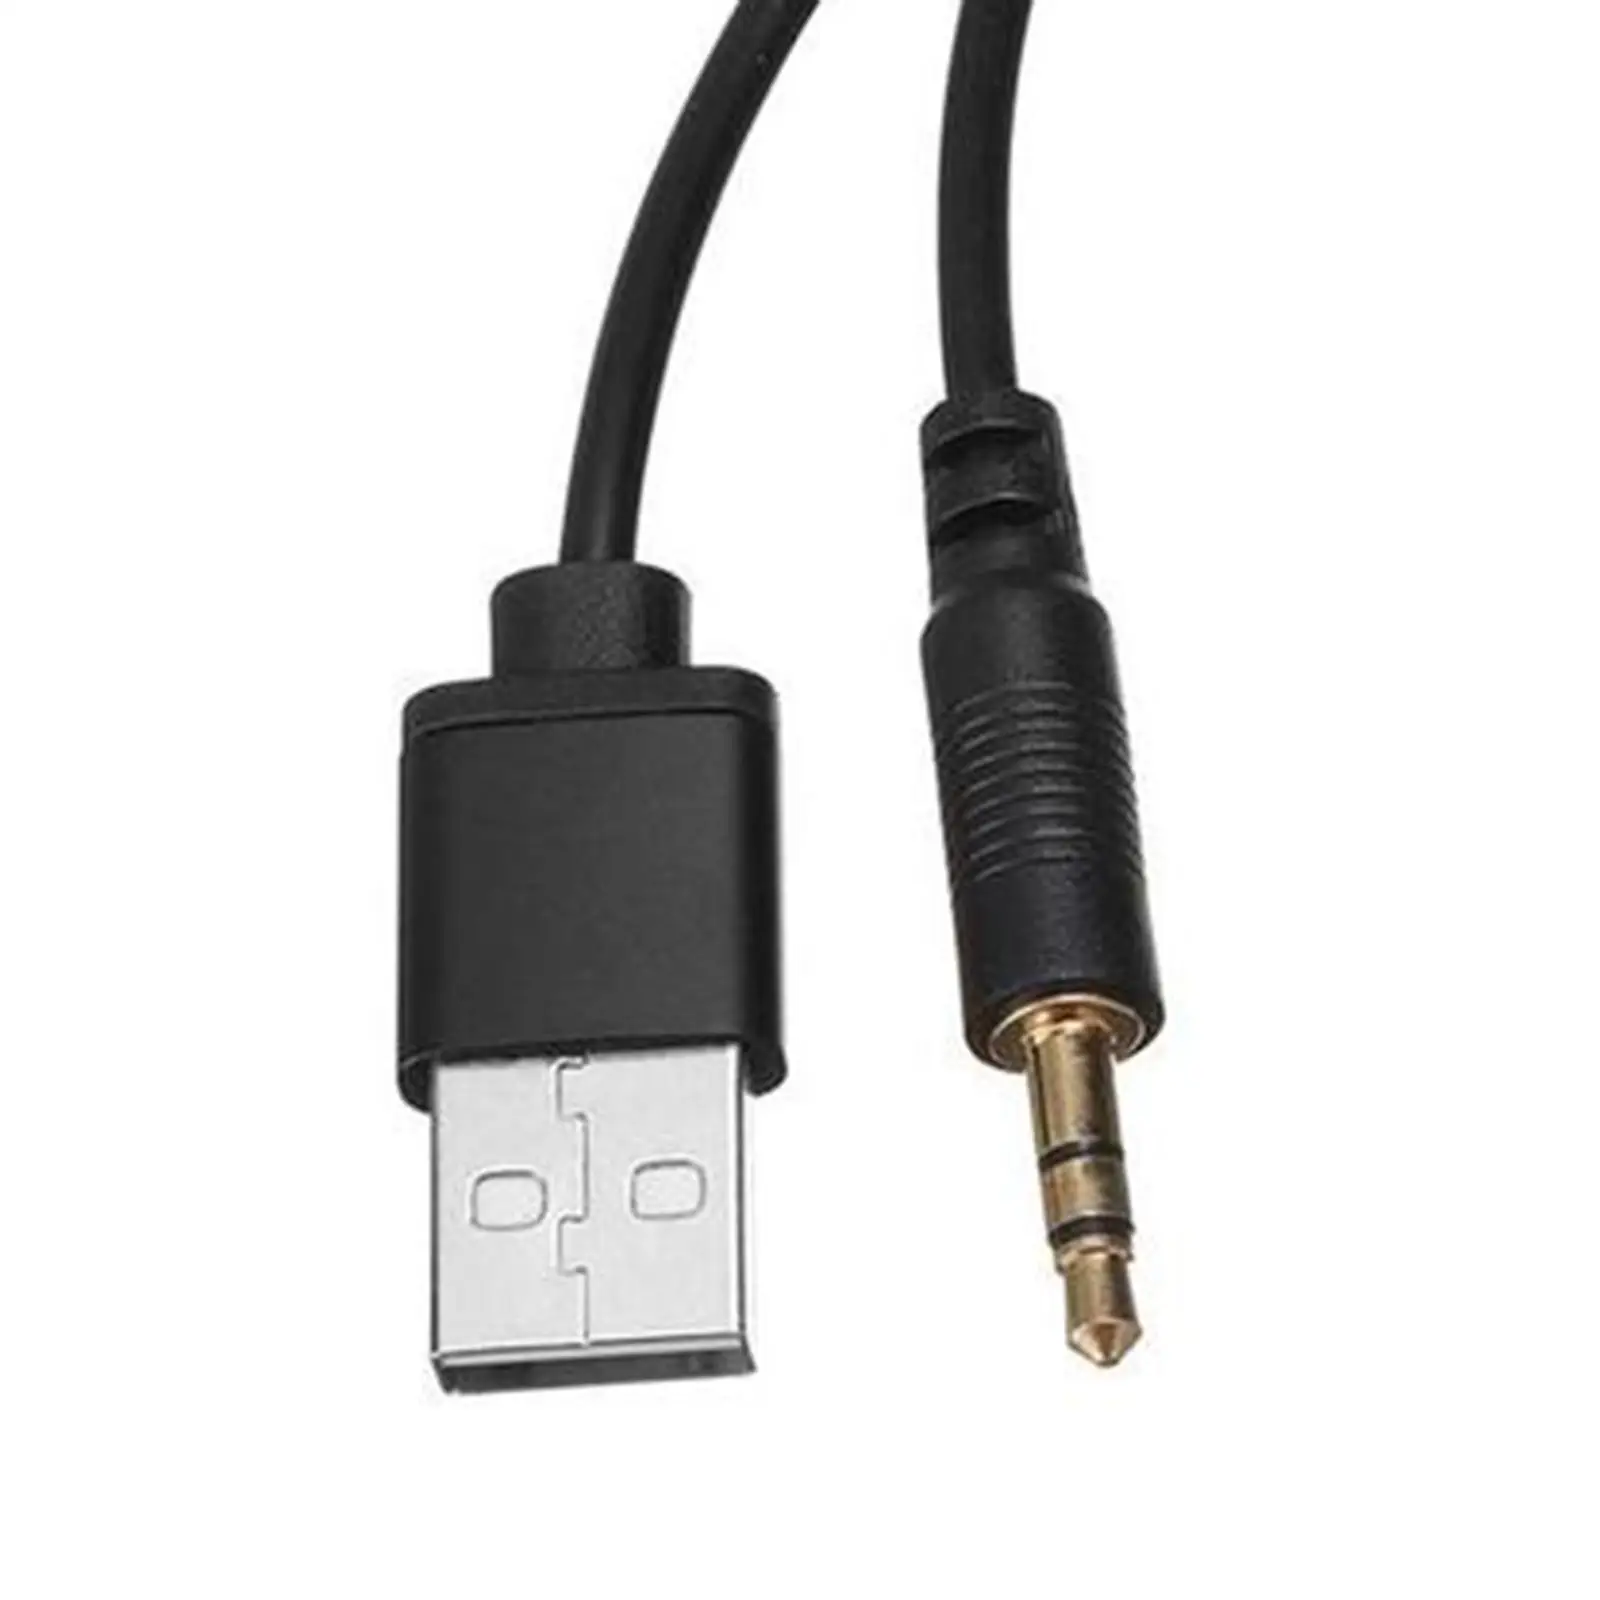 Car Bluetooth Radio Cable Adapter Auto Music Player Receiver Radio Cable Adapter for E90 E91 Models Car Charger Adapter